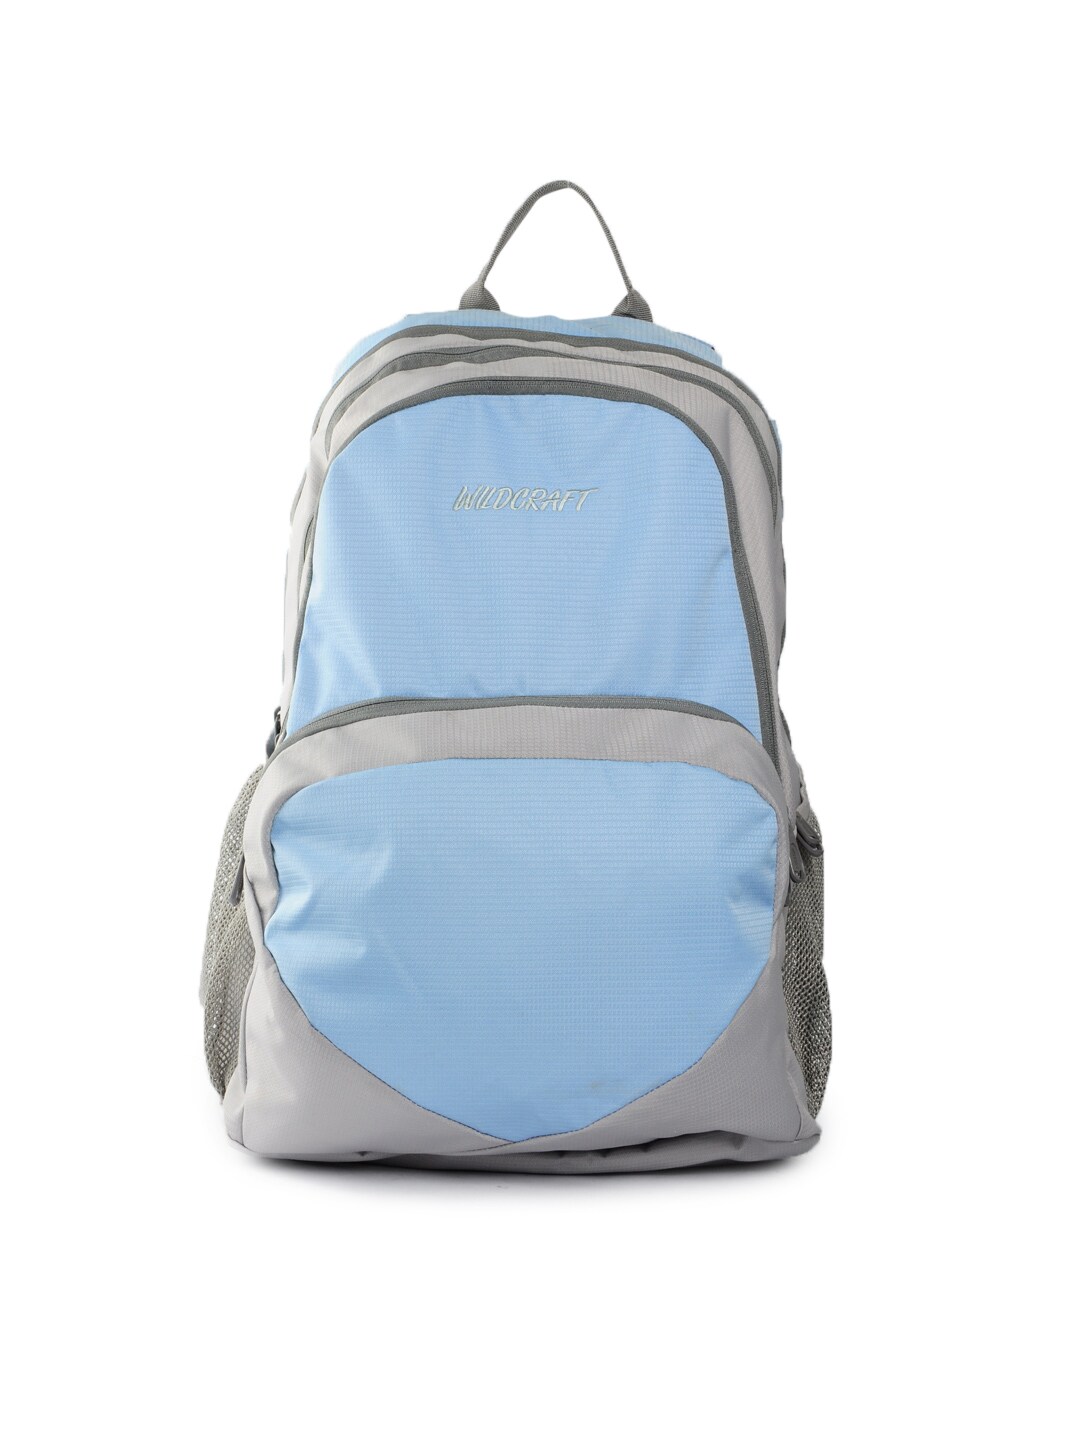 Wildcraft Unisex Grey and Blue Backpack